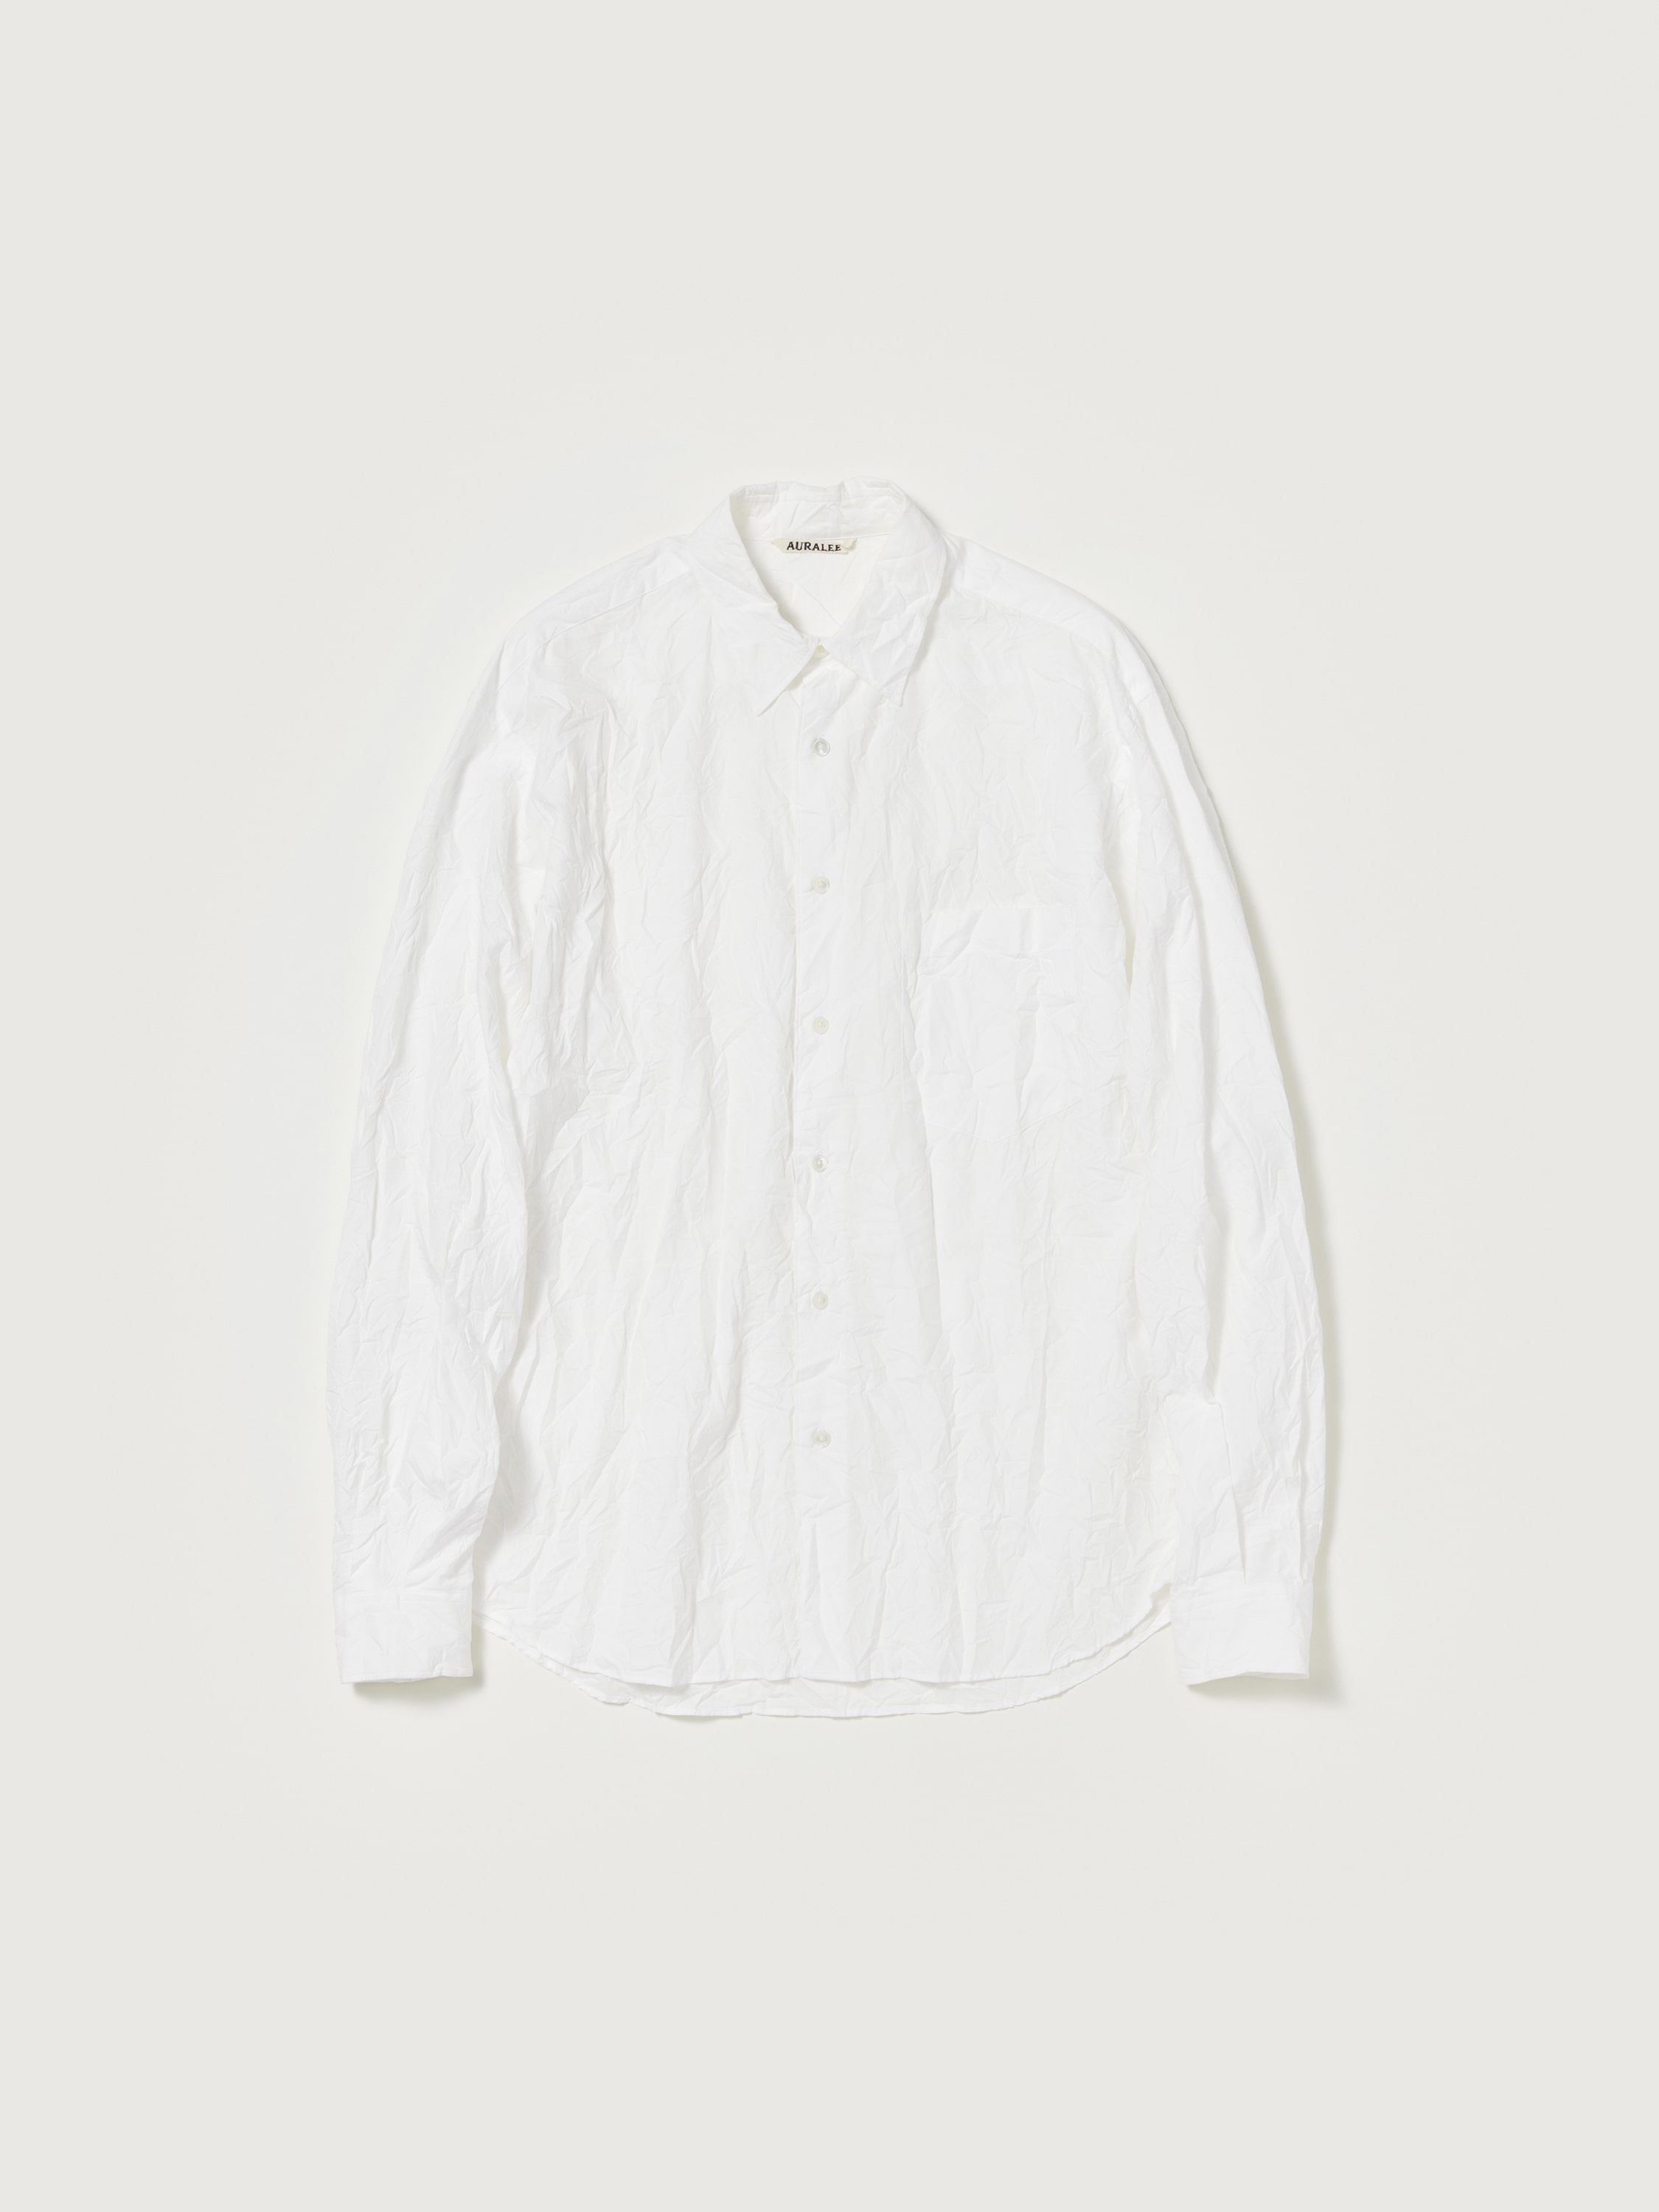 WRINKLED WASHED FINX TWILL SHIRT 詳細画像 WHITE 1